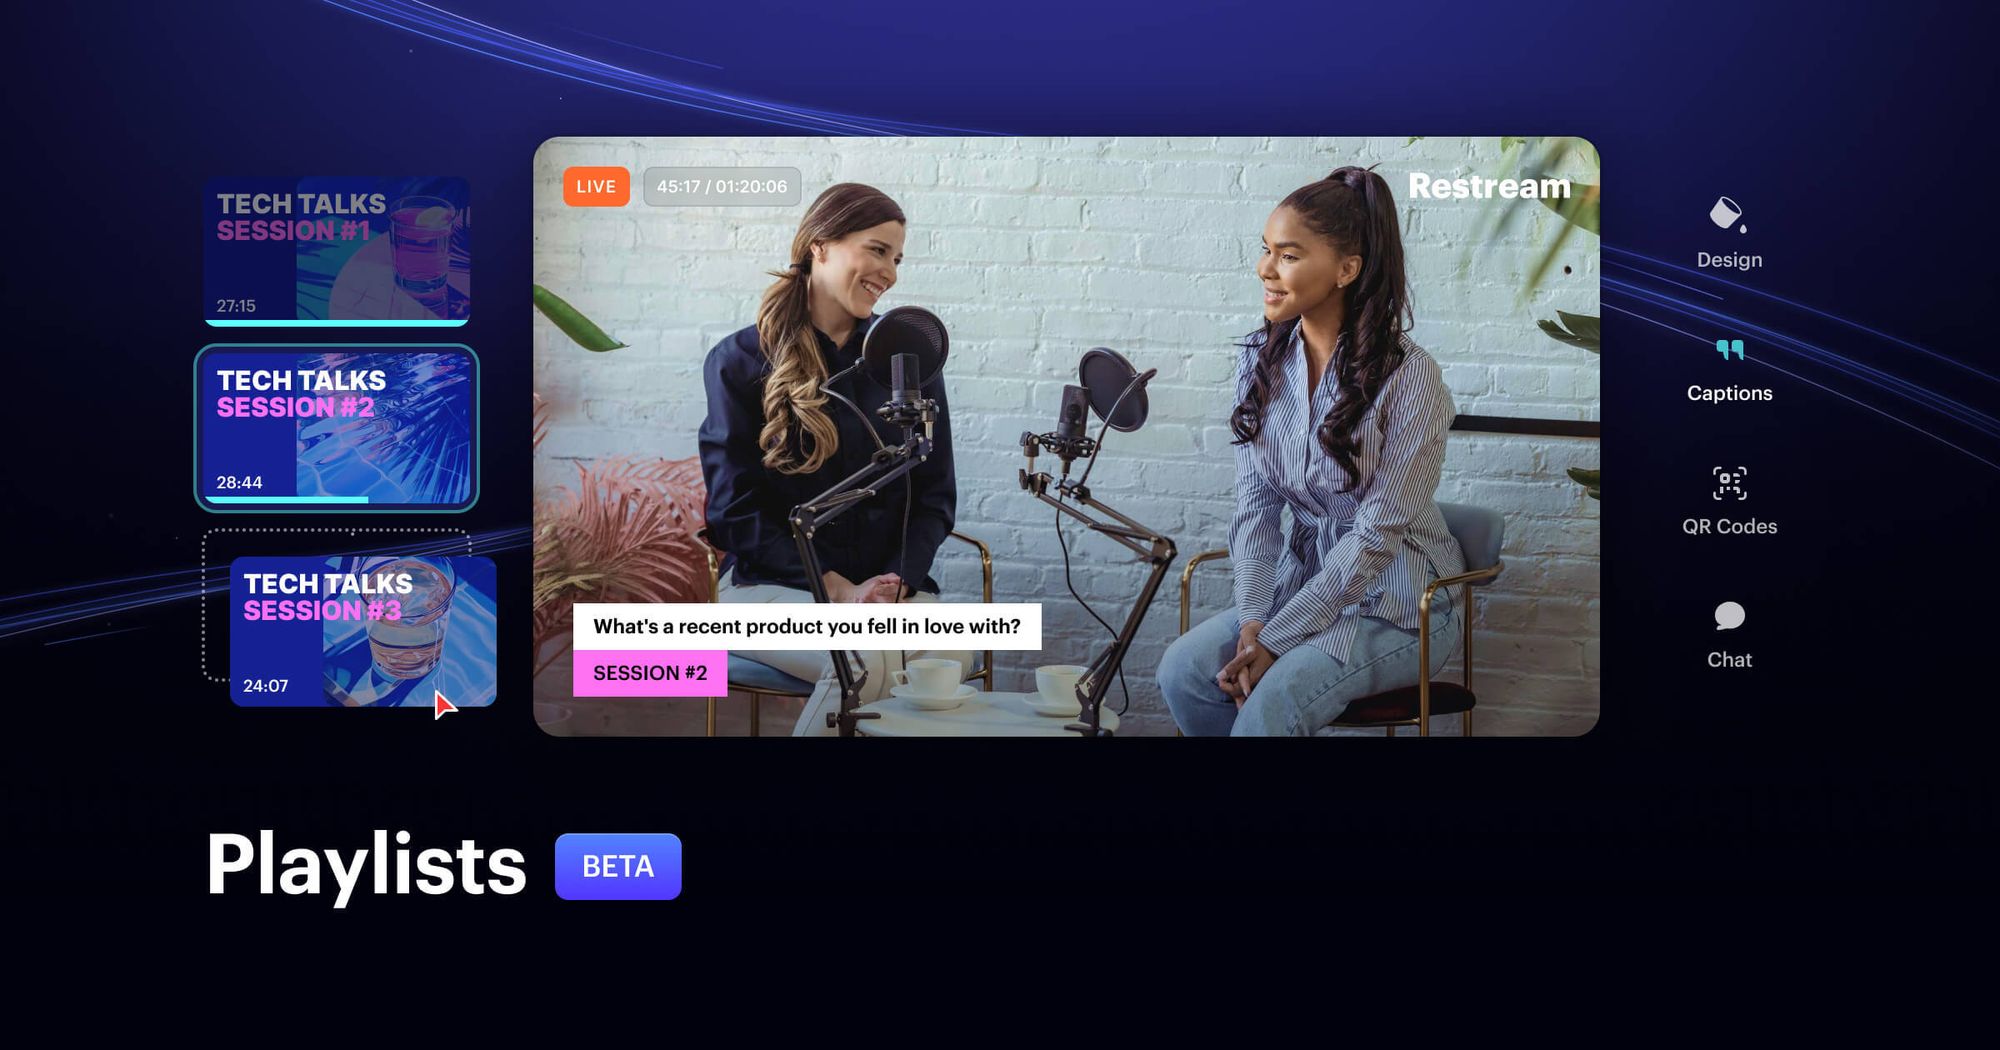 Extend your on-air time with live video playlists